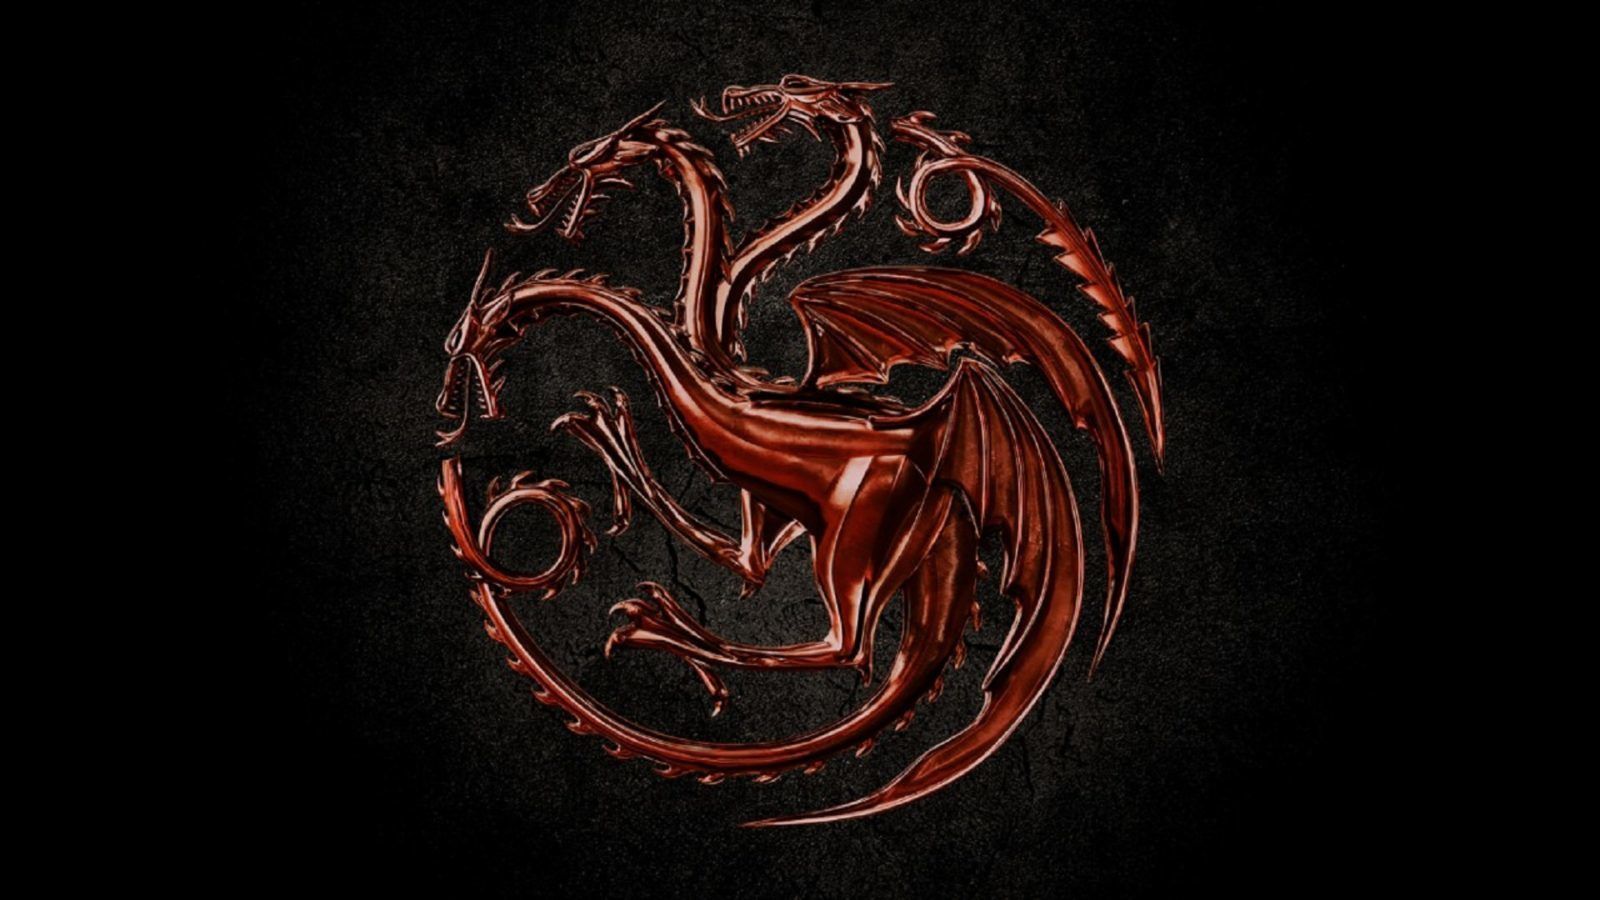 House Of The Dragon Season 2: All We Know About The Game Of Thrones Prequel